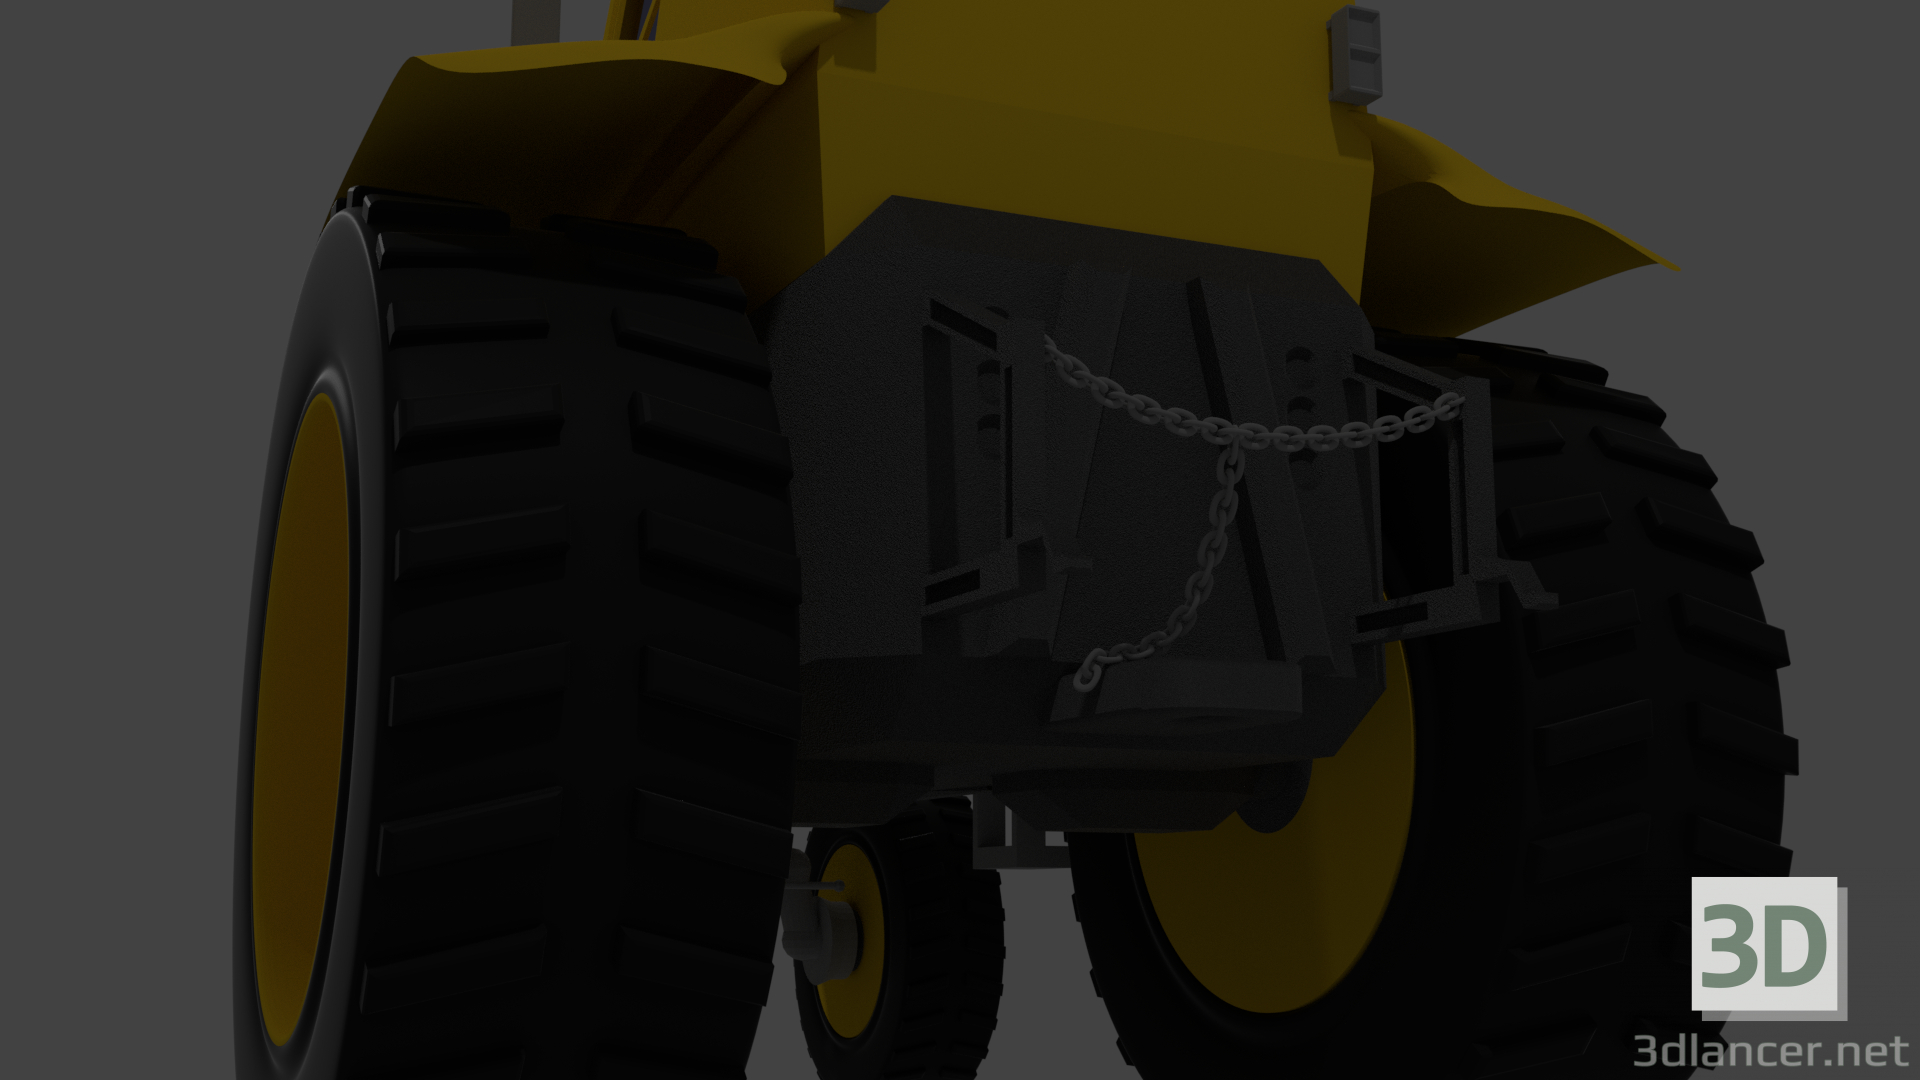 3d model Tractor - preview